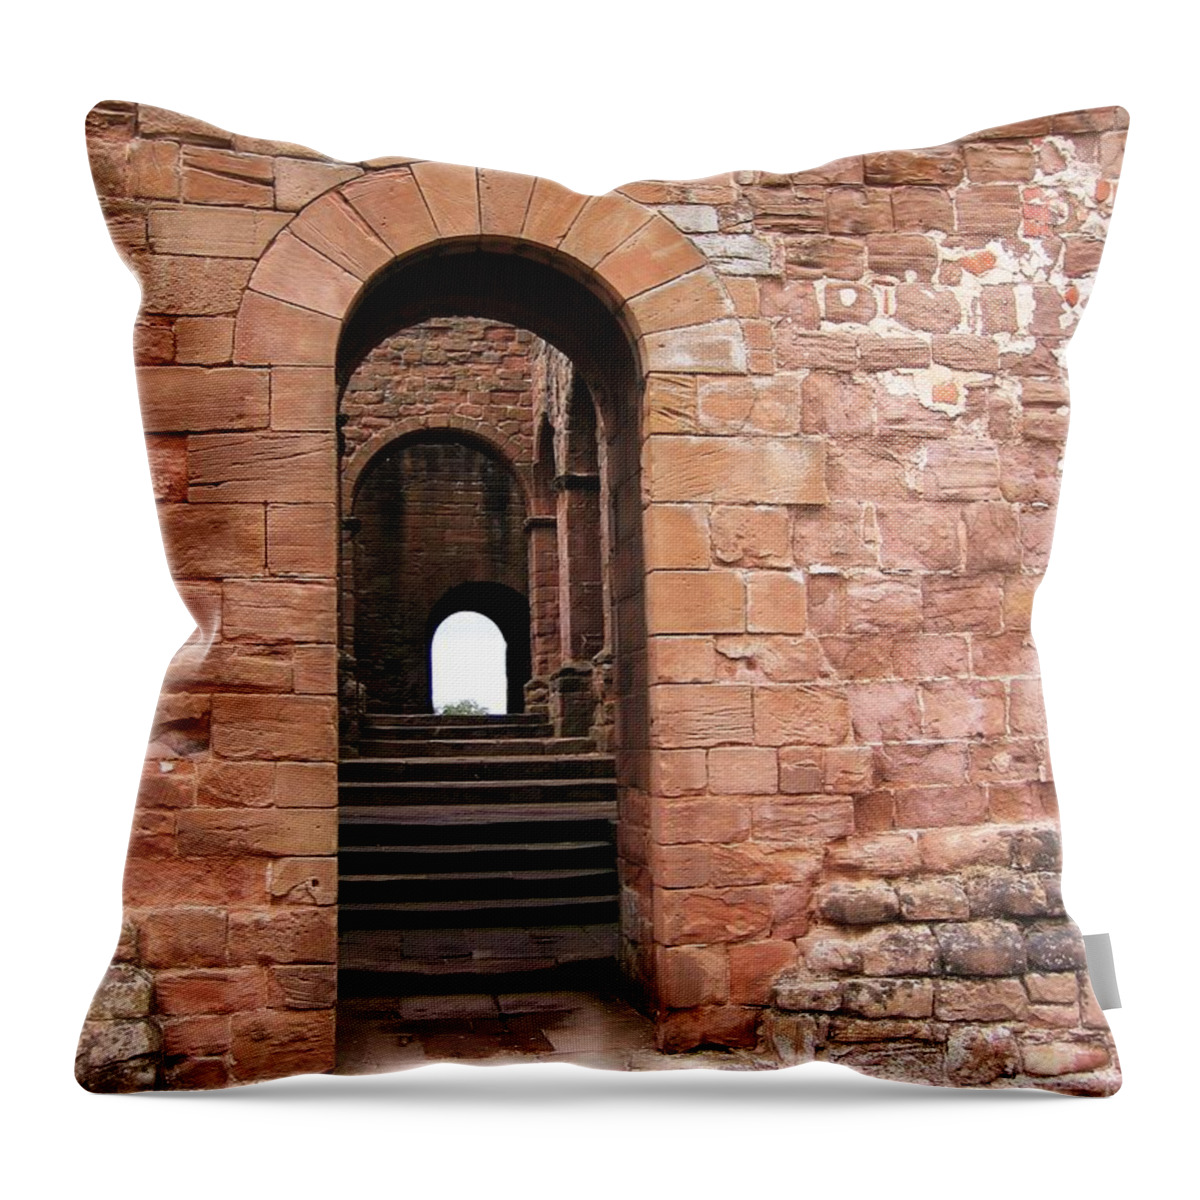 Kenilworth Castle Throw Pillow featuring the photograph To The Stairs by Denise Railey